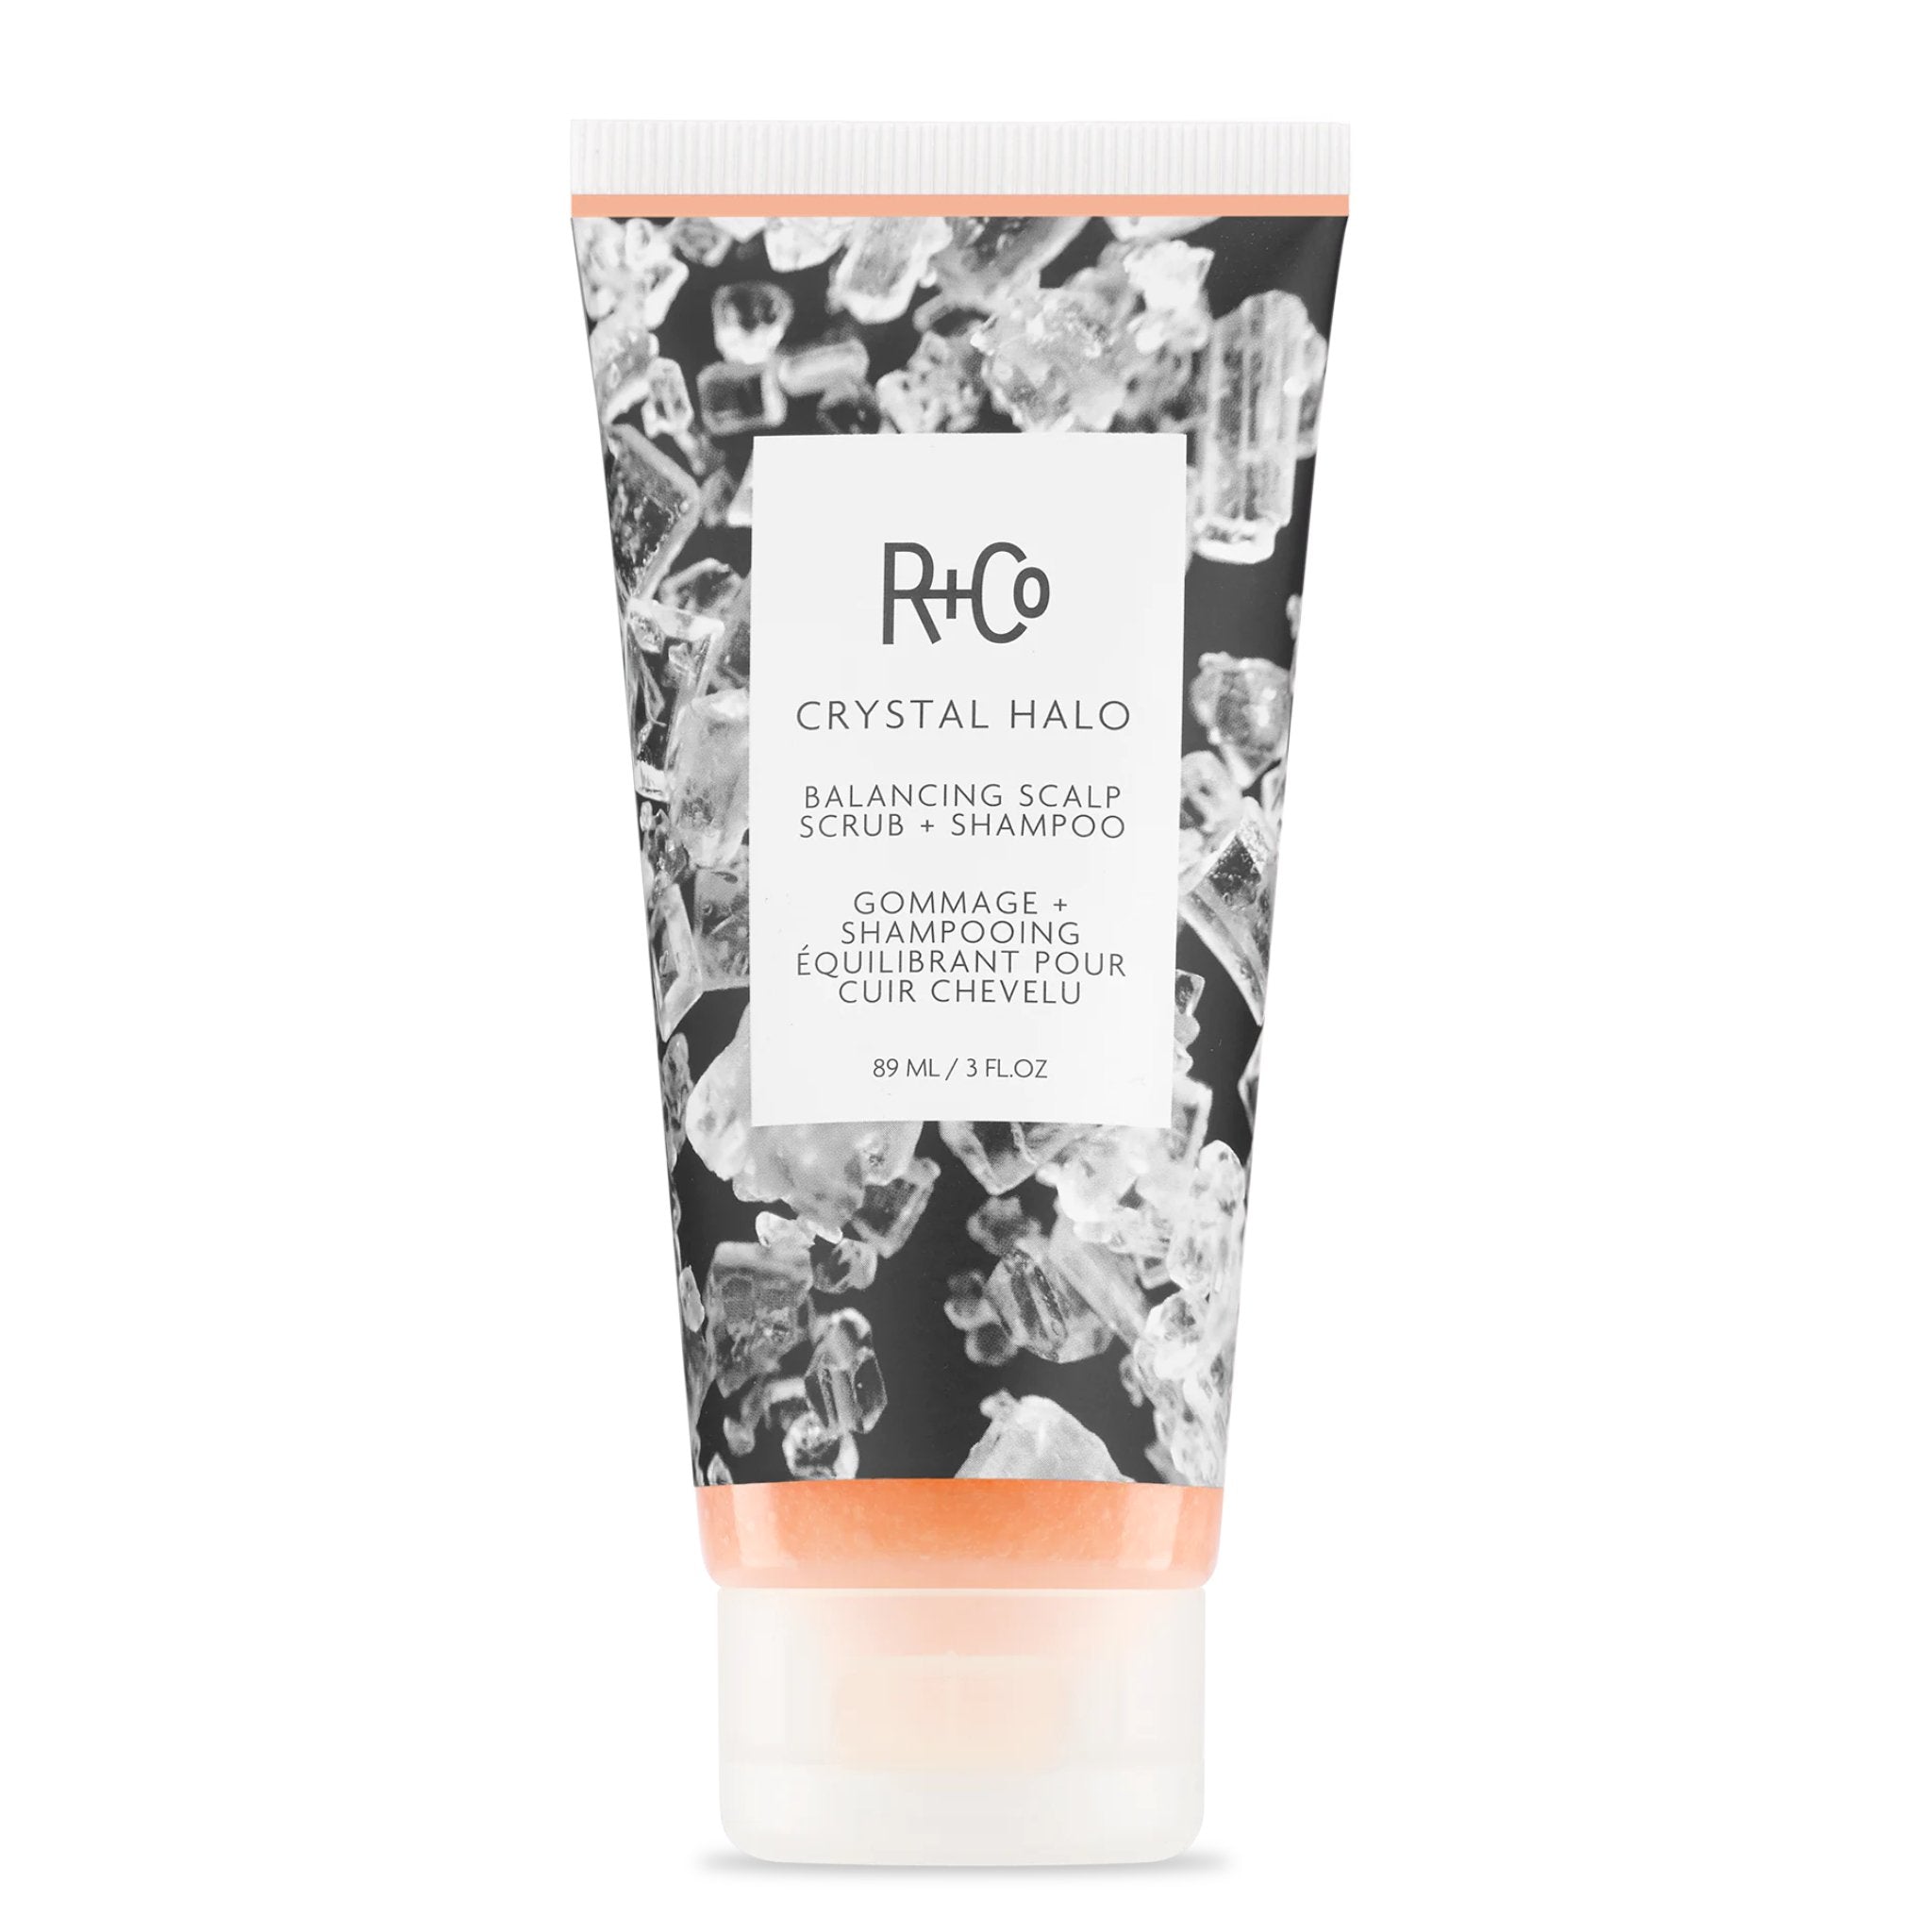 R+Co. Crystal Halo Gommage + Shampoing Équilibrant pour Cuir Chevelu - 89 ml - Concept C. Shop